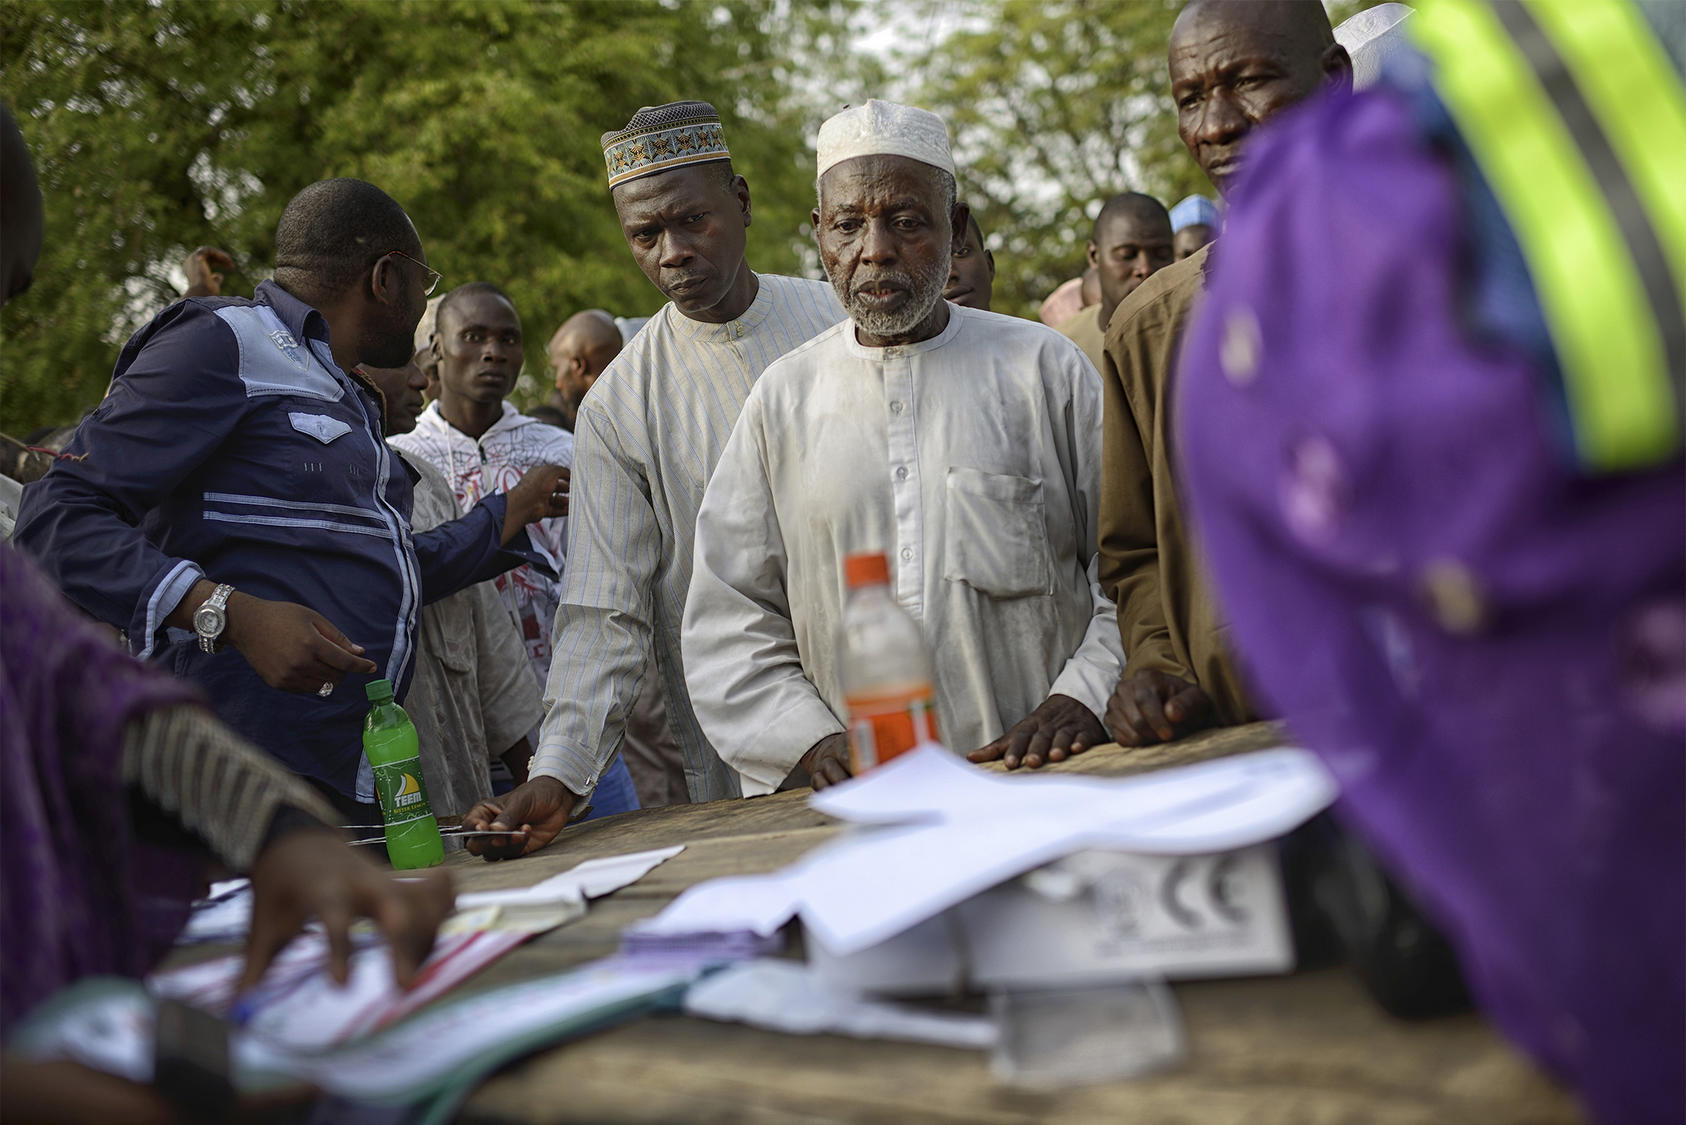 Voters line up as Nigeria elected President Muhammadu Buhari in 2015. As they elect his successor, Nigerians agree on making their democracy more inclusive of their many communal groups. They are debating how to do it.